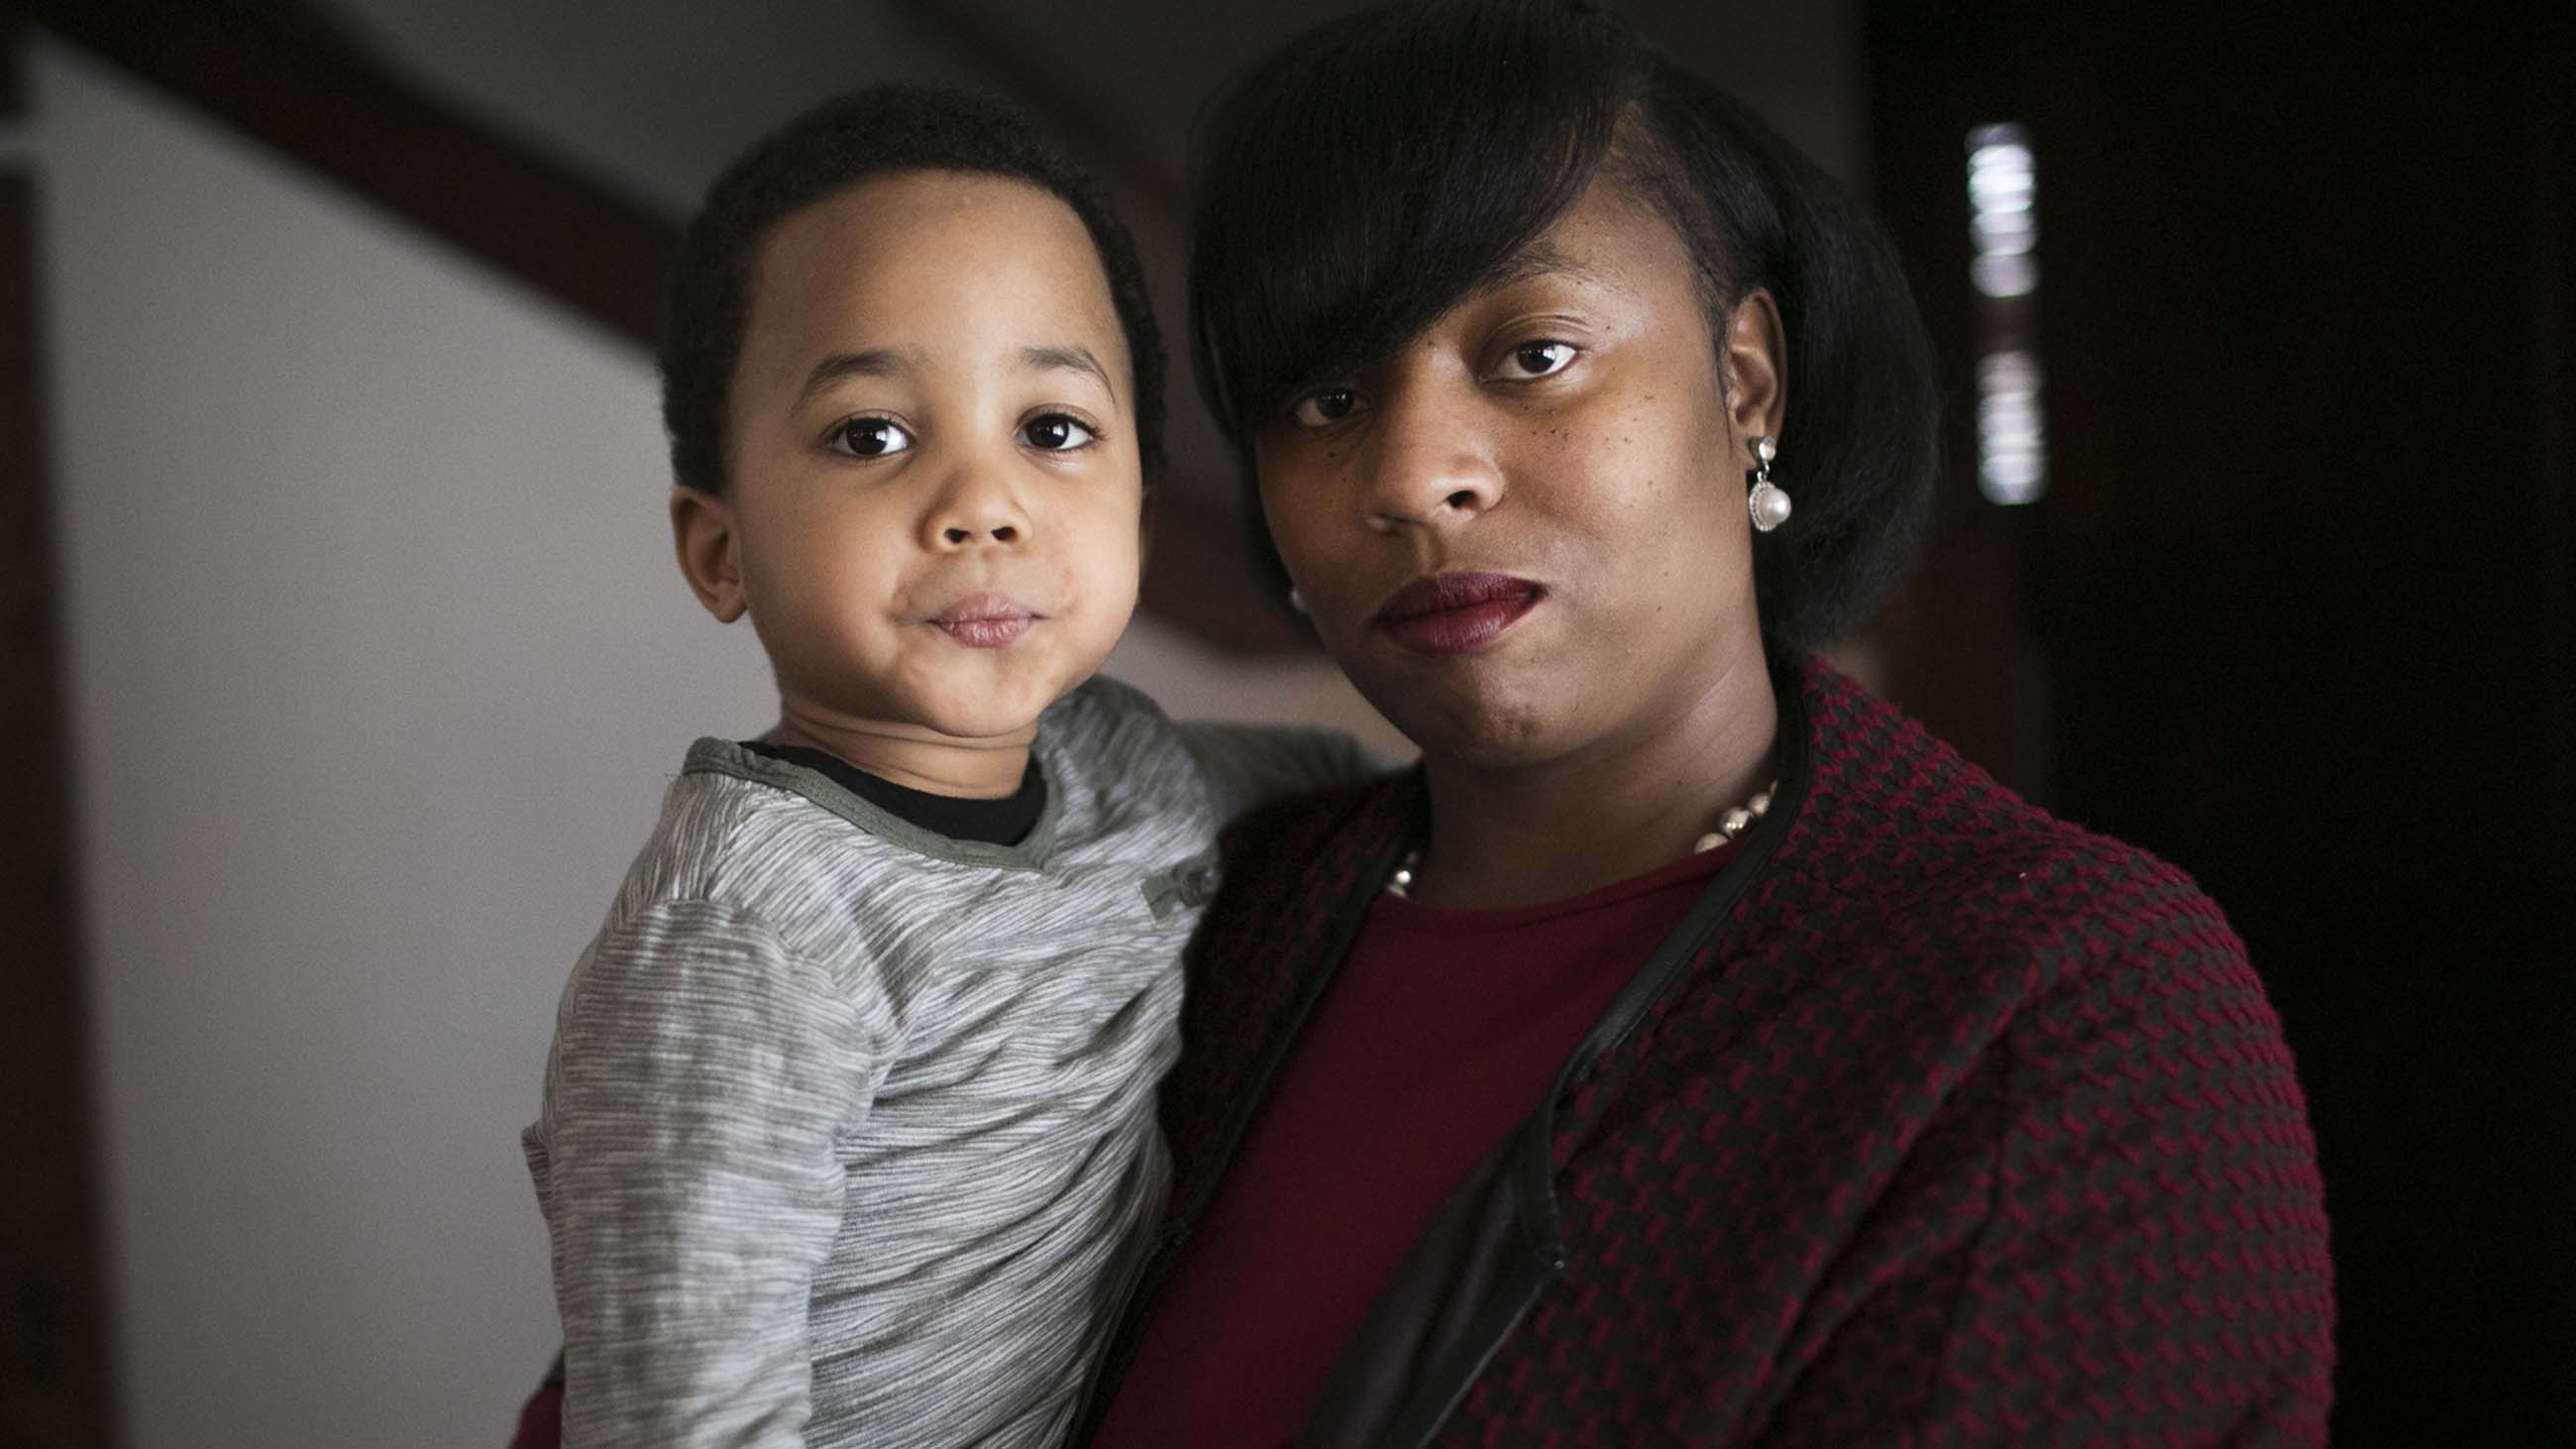 Shecara Norris stands with her son Michael in Columbus, Ohio on February 17, 2018. Michael had a blood lead level of 30 mcg/dL when he was 2 years old.